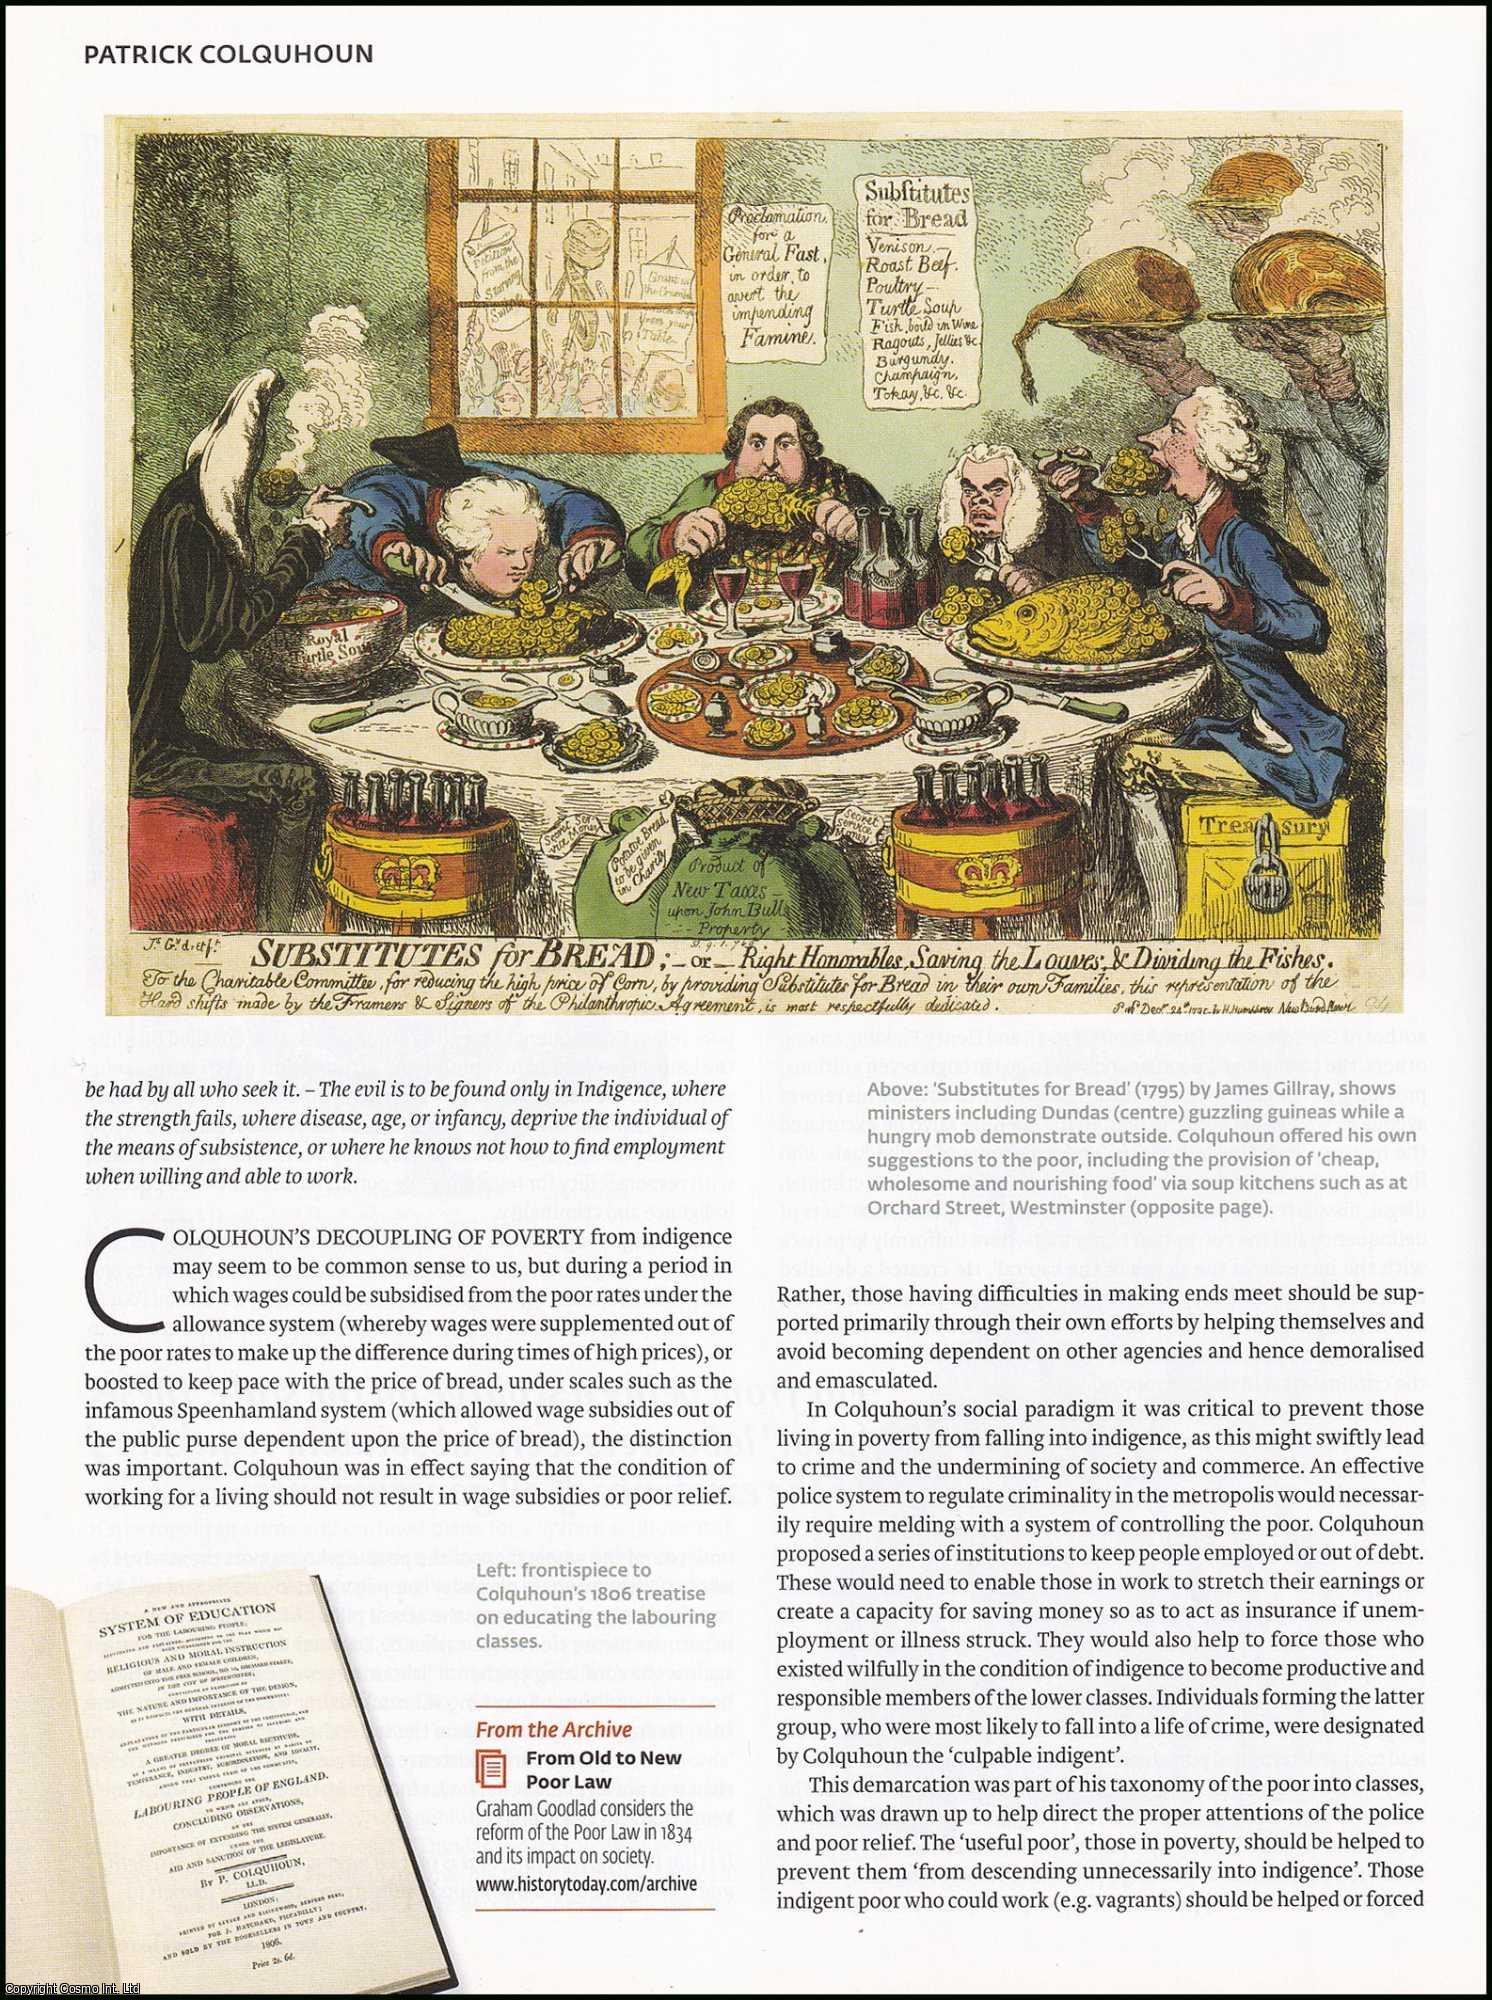 David Filtness - Poverty's Policeman: The Draconian Policies of Patrick Colquhoun, 18th Century Founder of the Thames Police. An original article from History Today magazine, 2014.